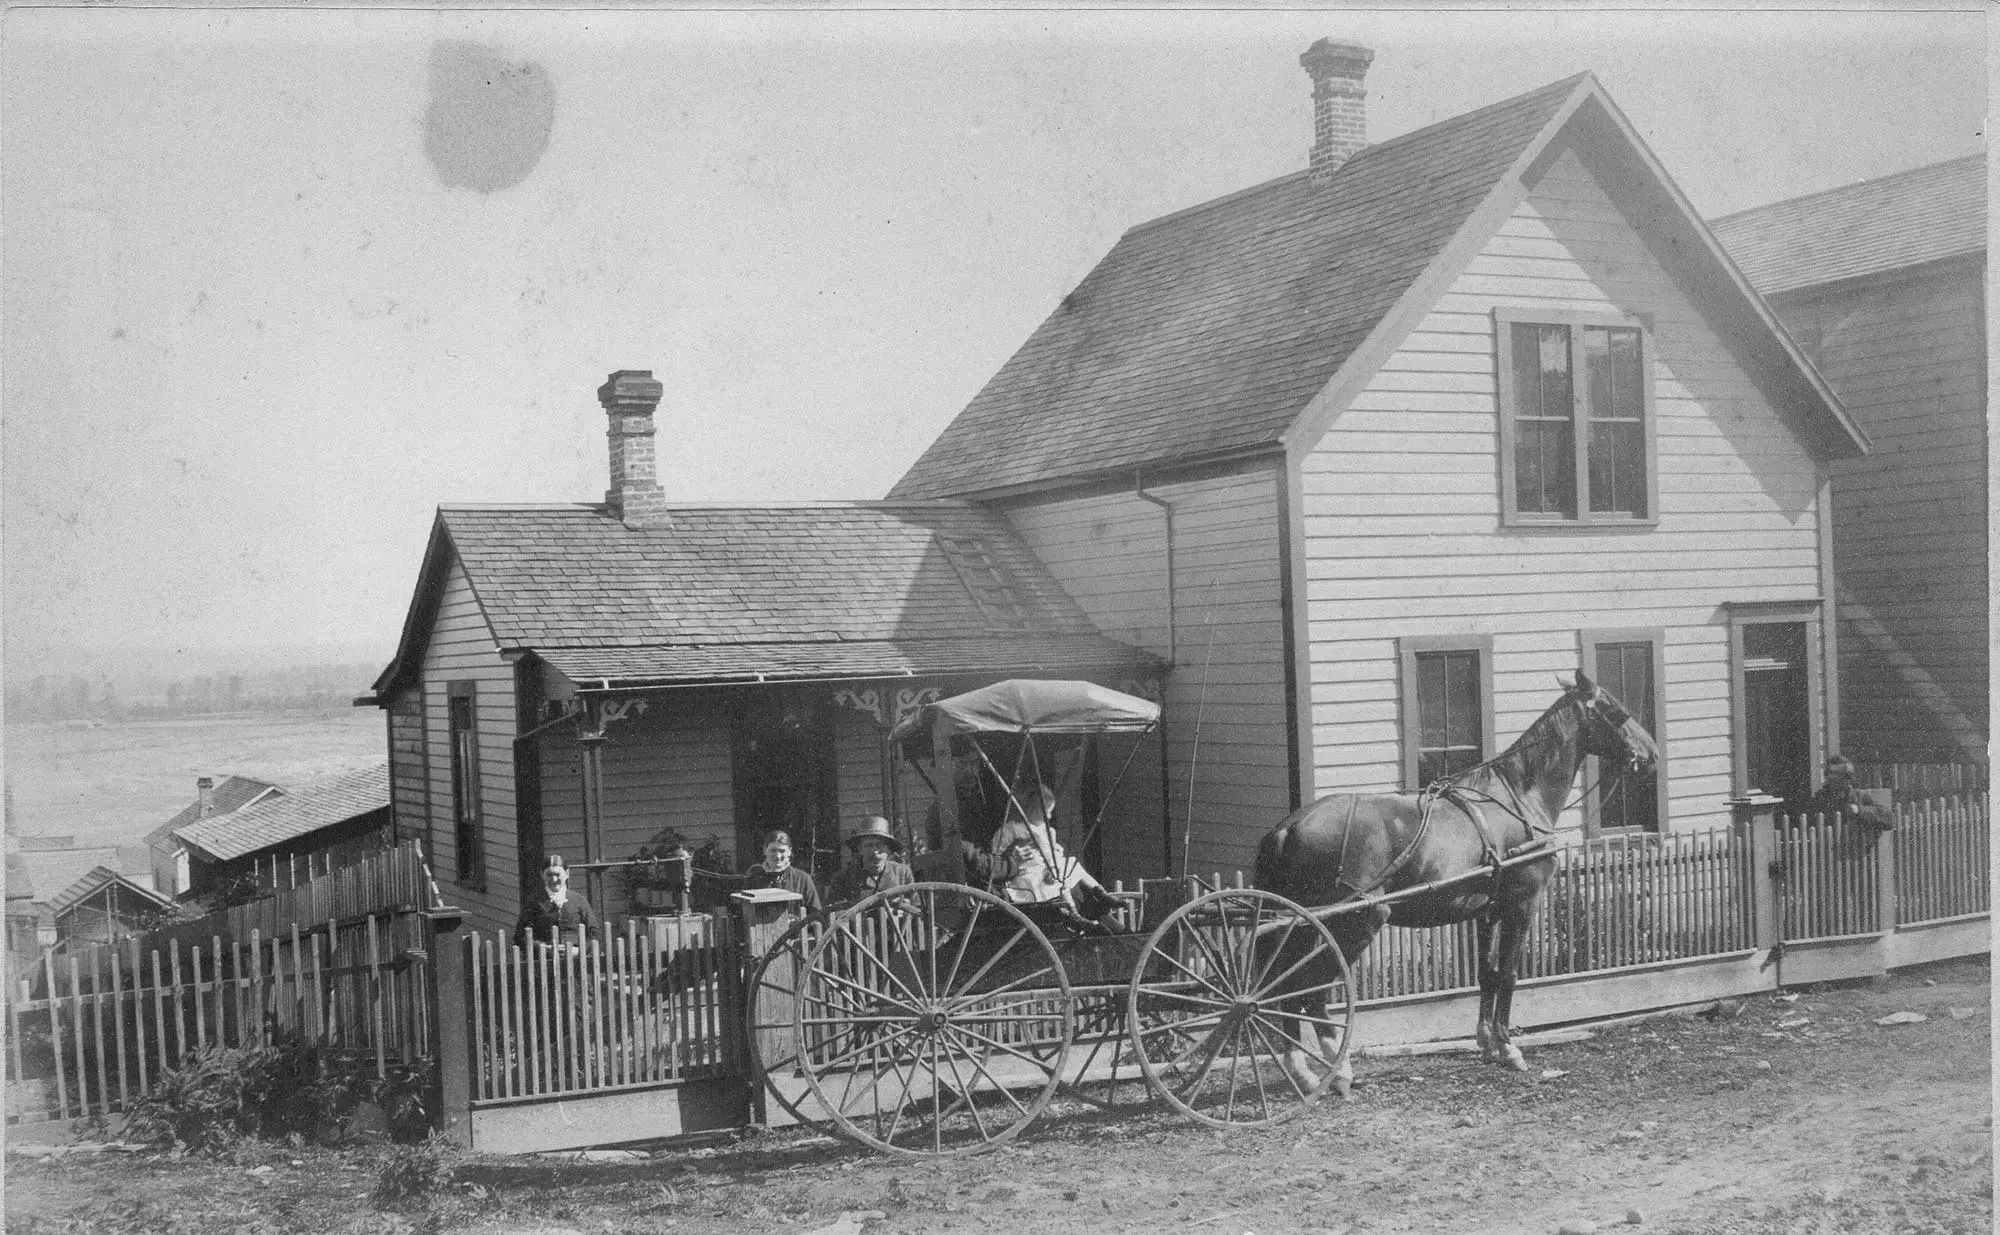 Upright And Wing photo with house and buggy